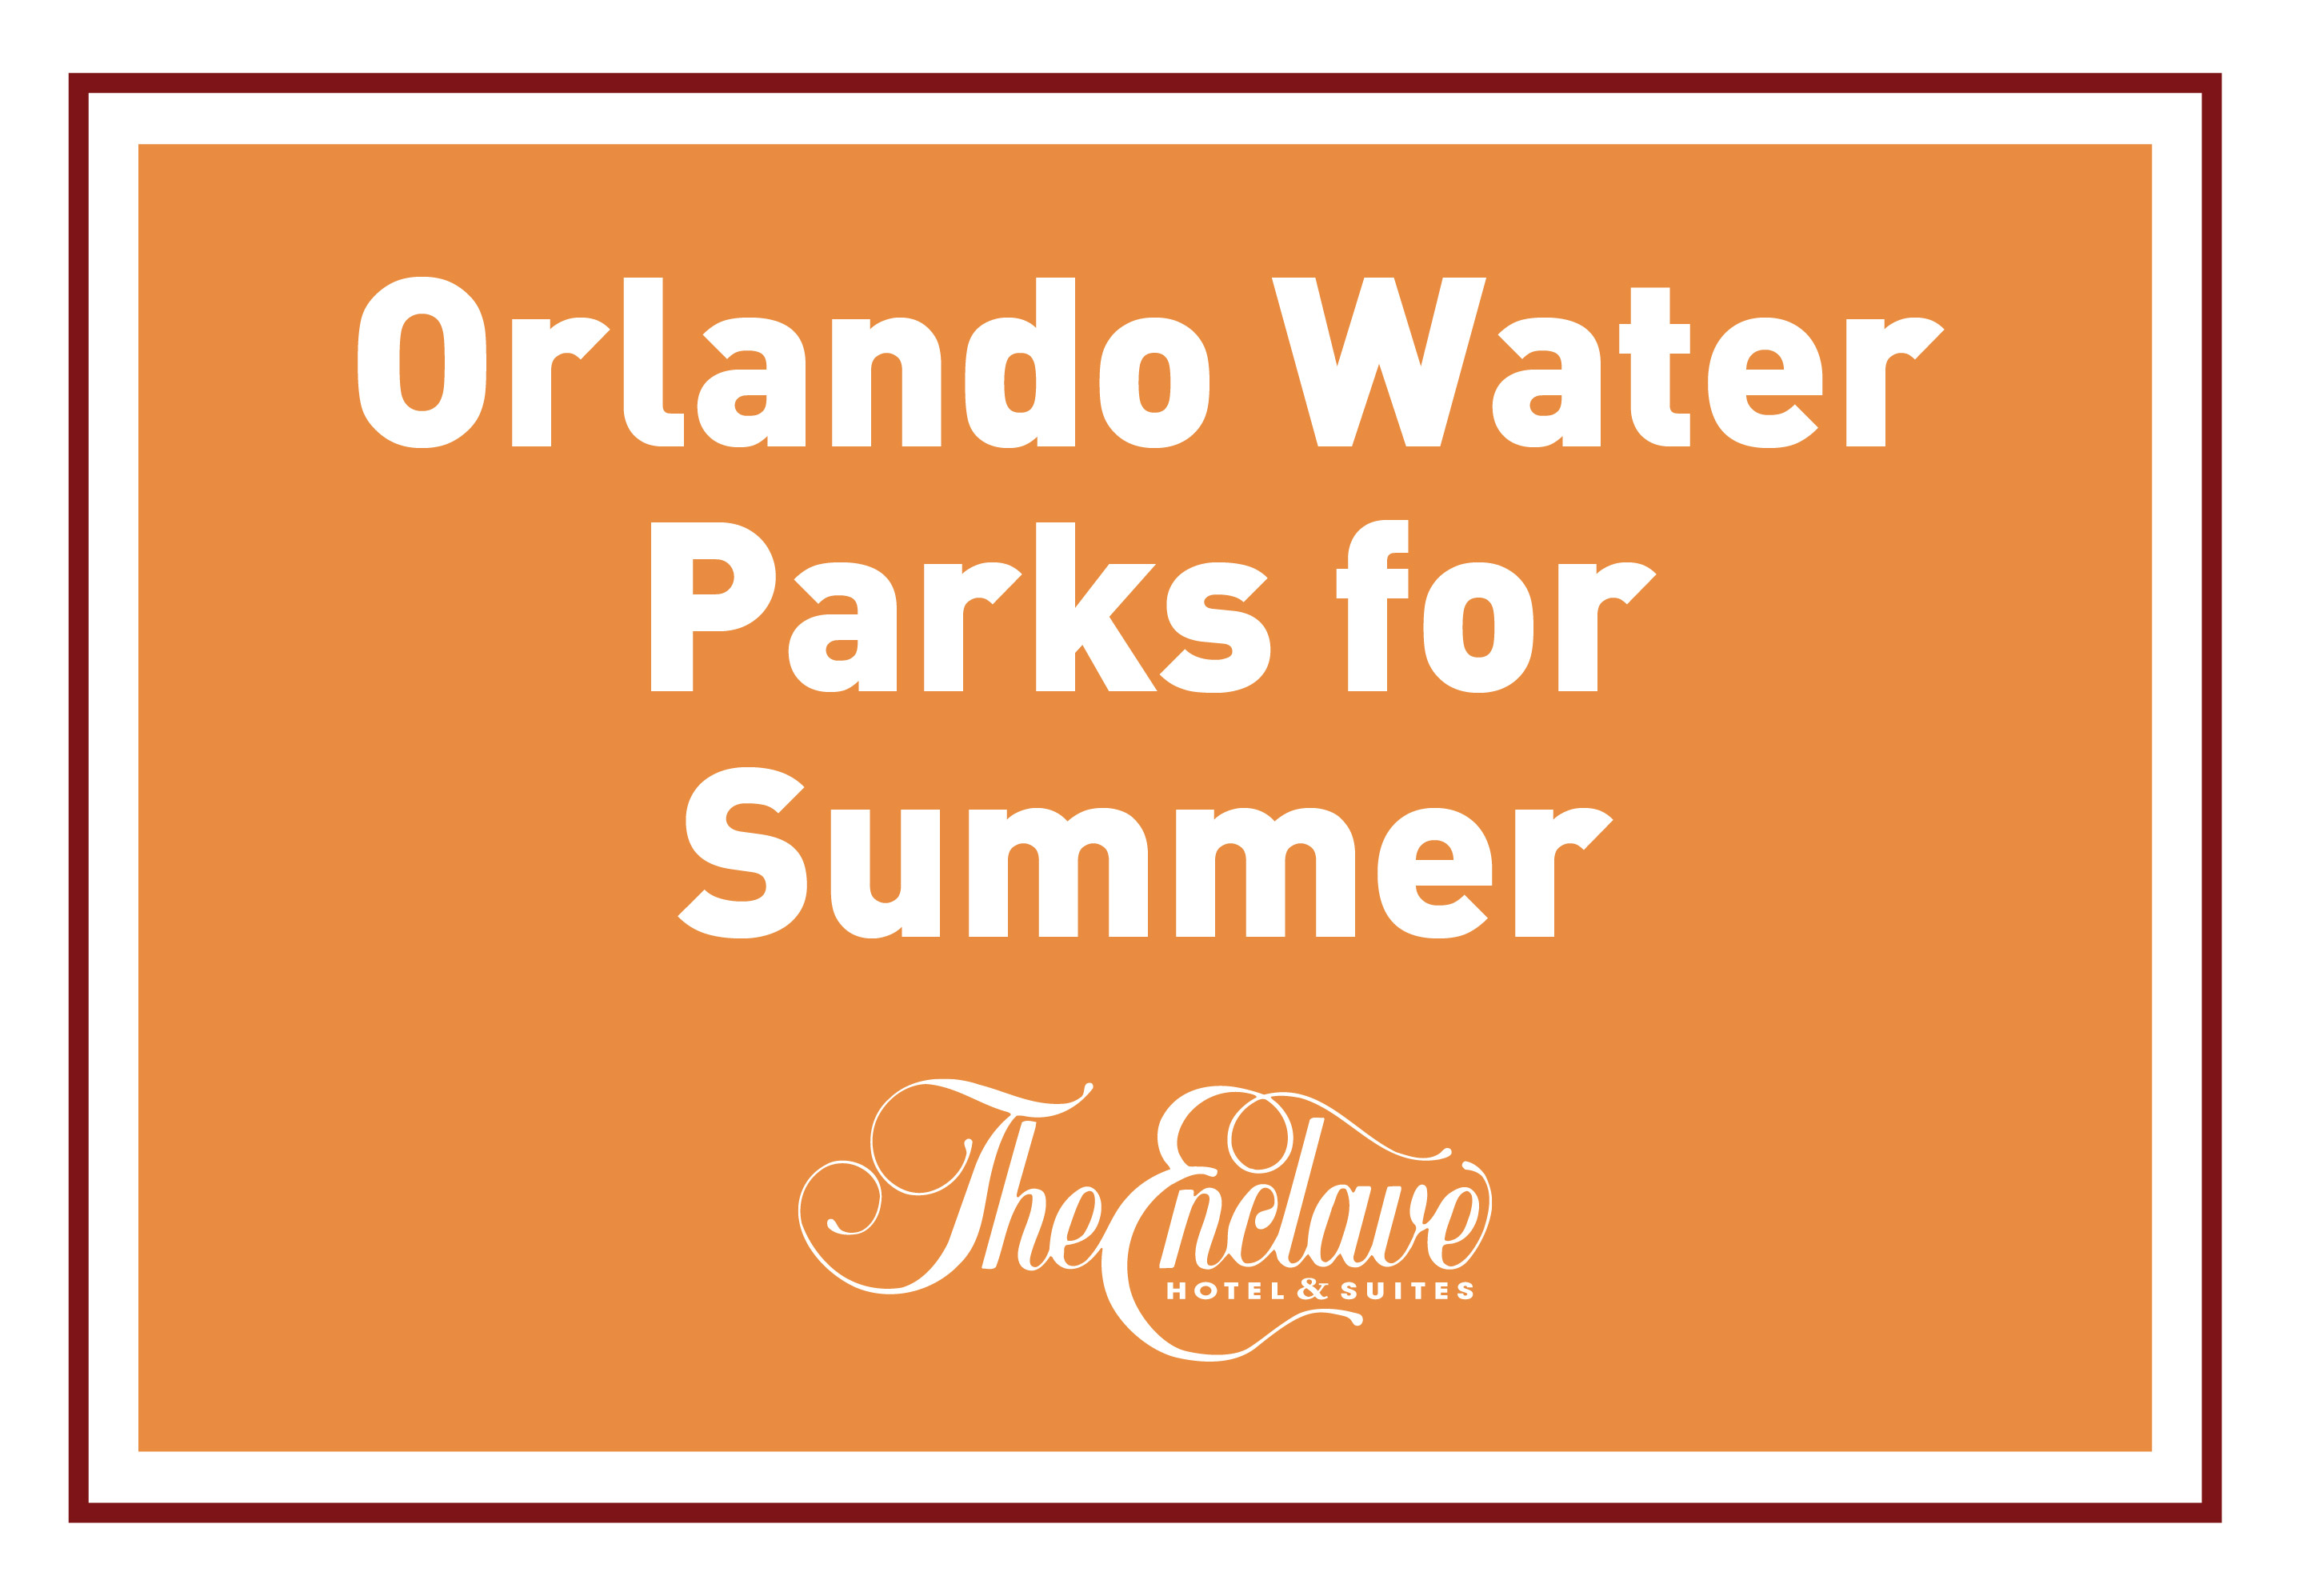 Orlando Water Parks for Summer